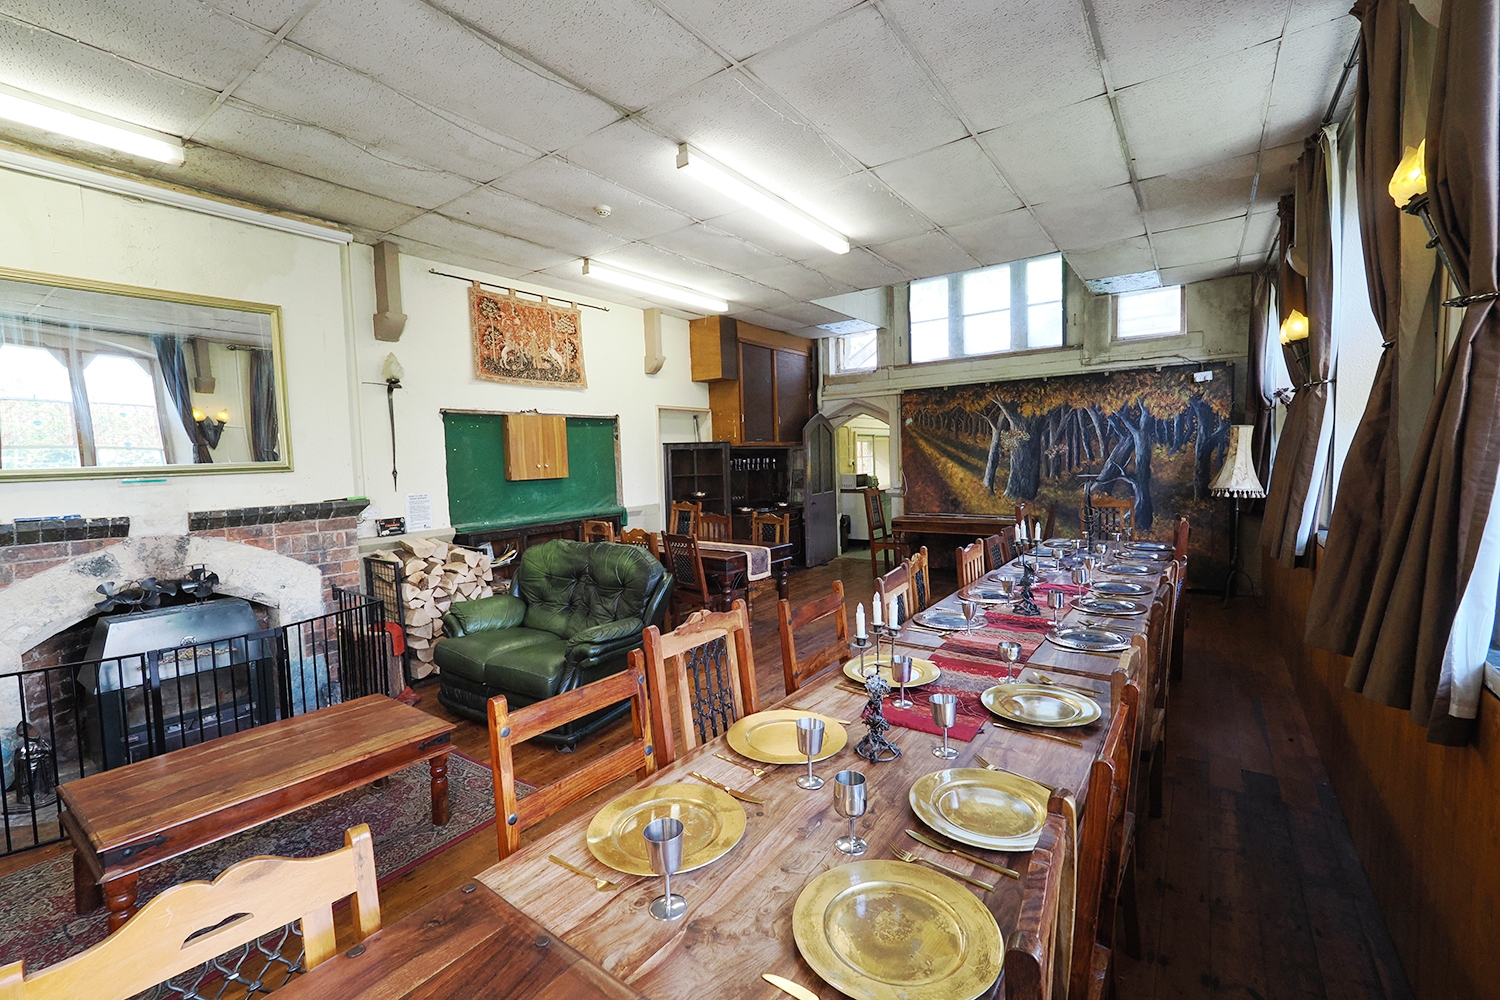 Oakraven Field Centre - the main hall set up for dining